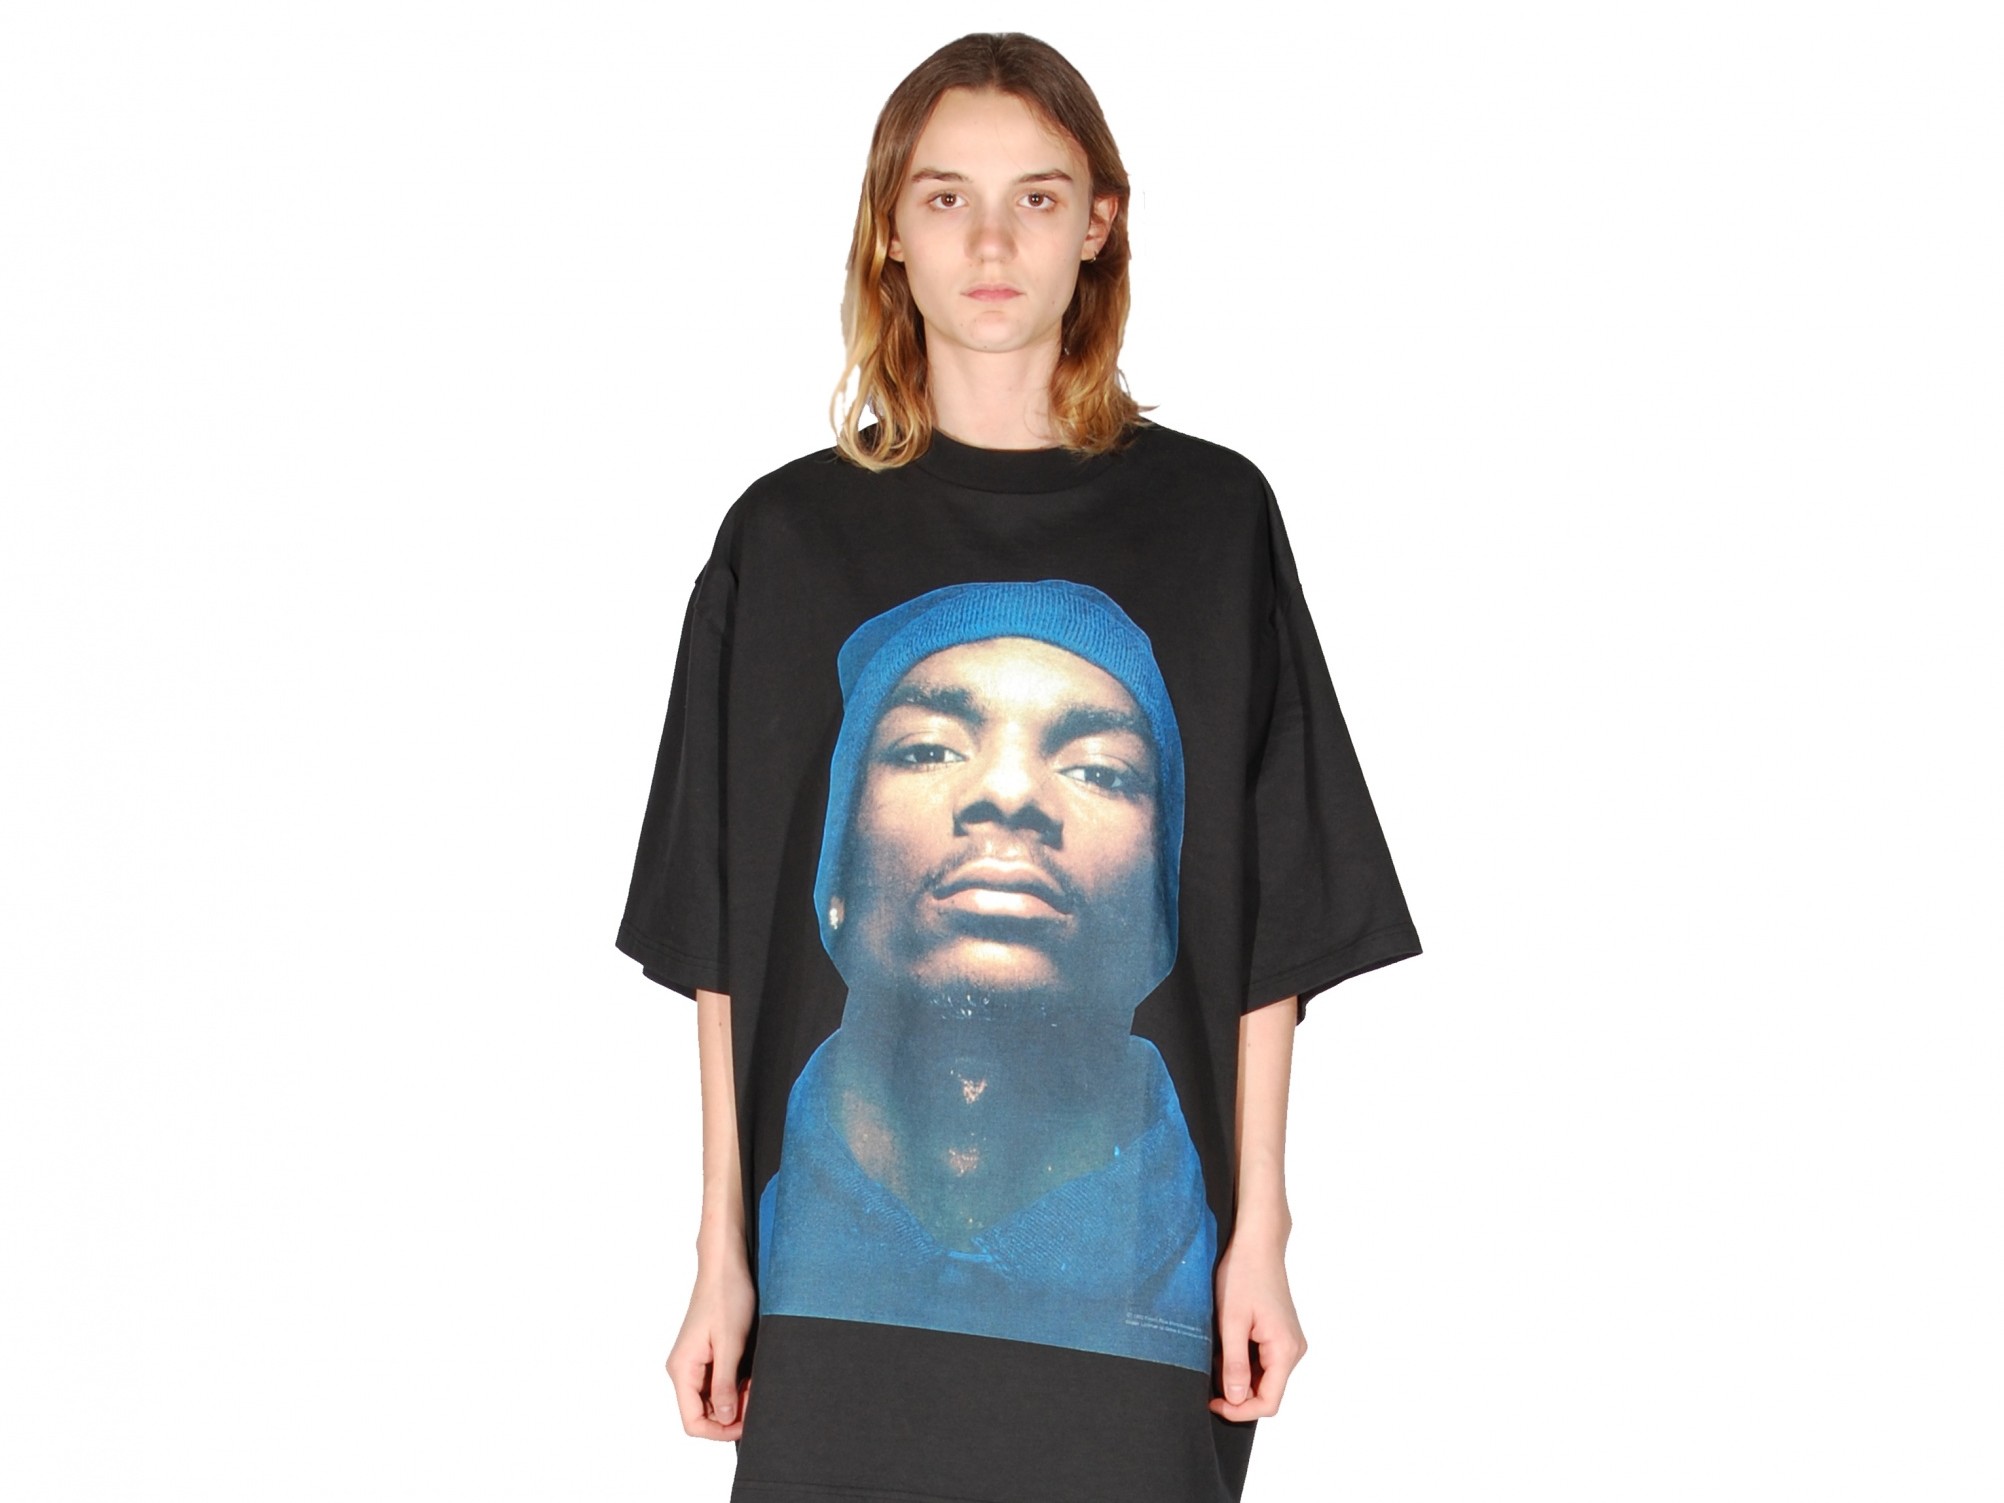 Vetements' Snoop Dogg T-Shirt Will Set You Back Almost $1,000